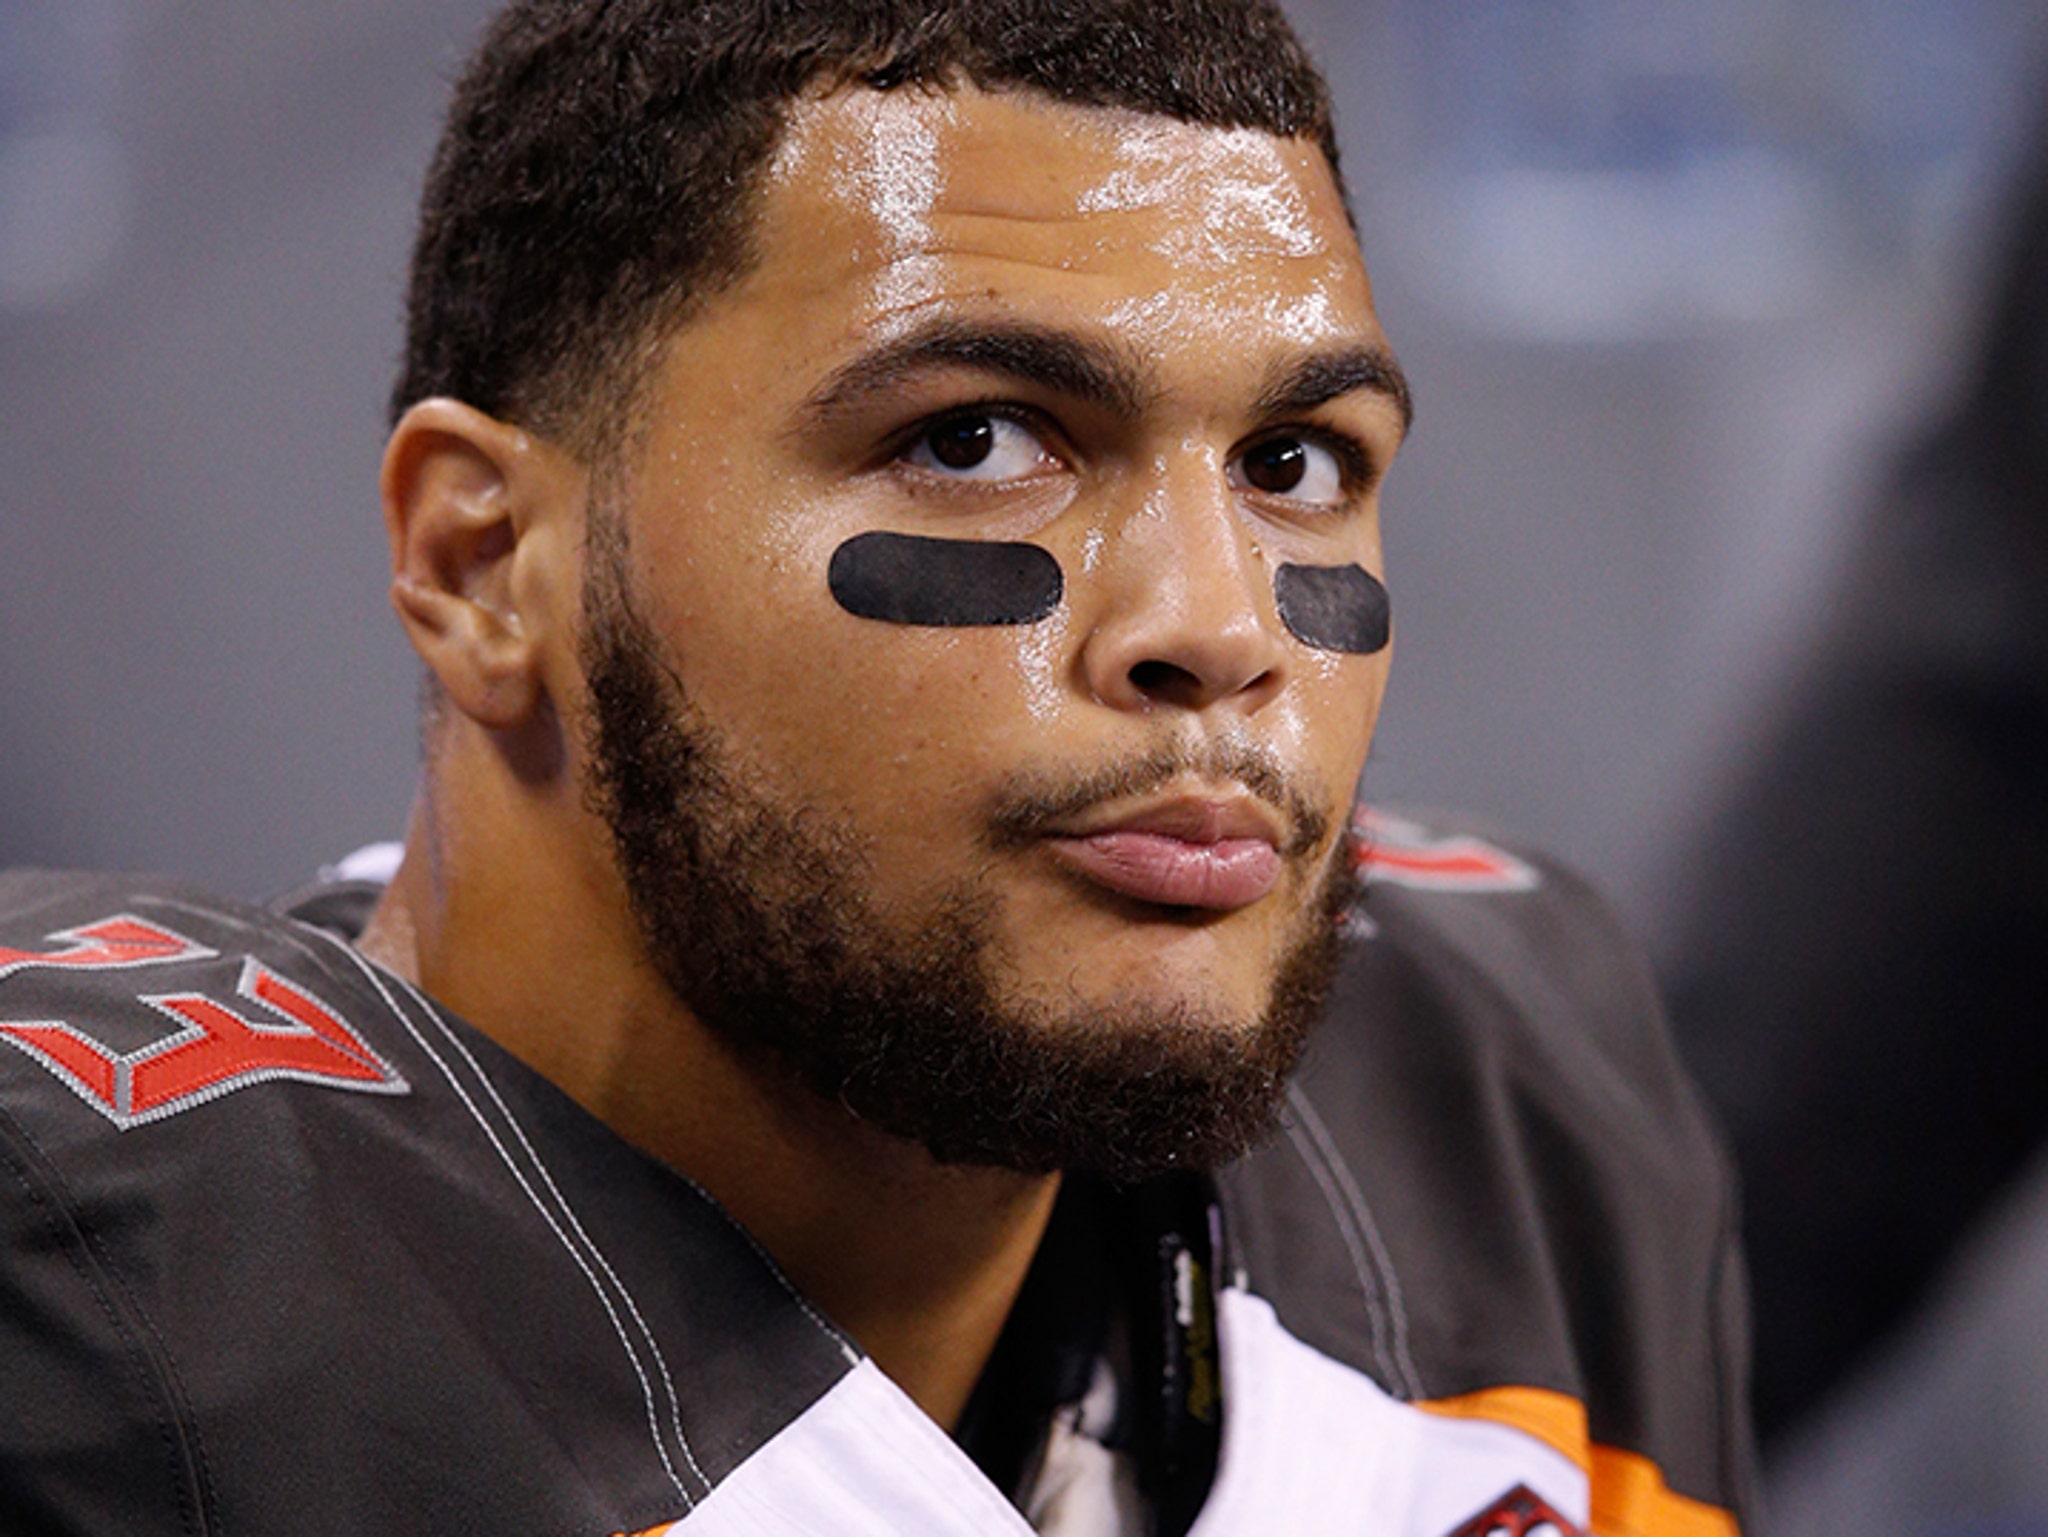 What motivated Bucs' Mike Evans to sit during anthem to protest Trump?